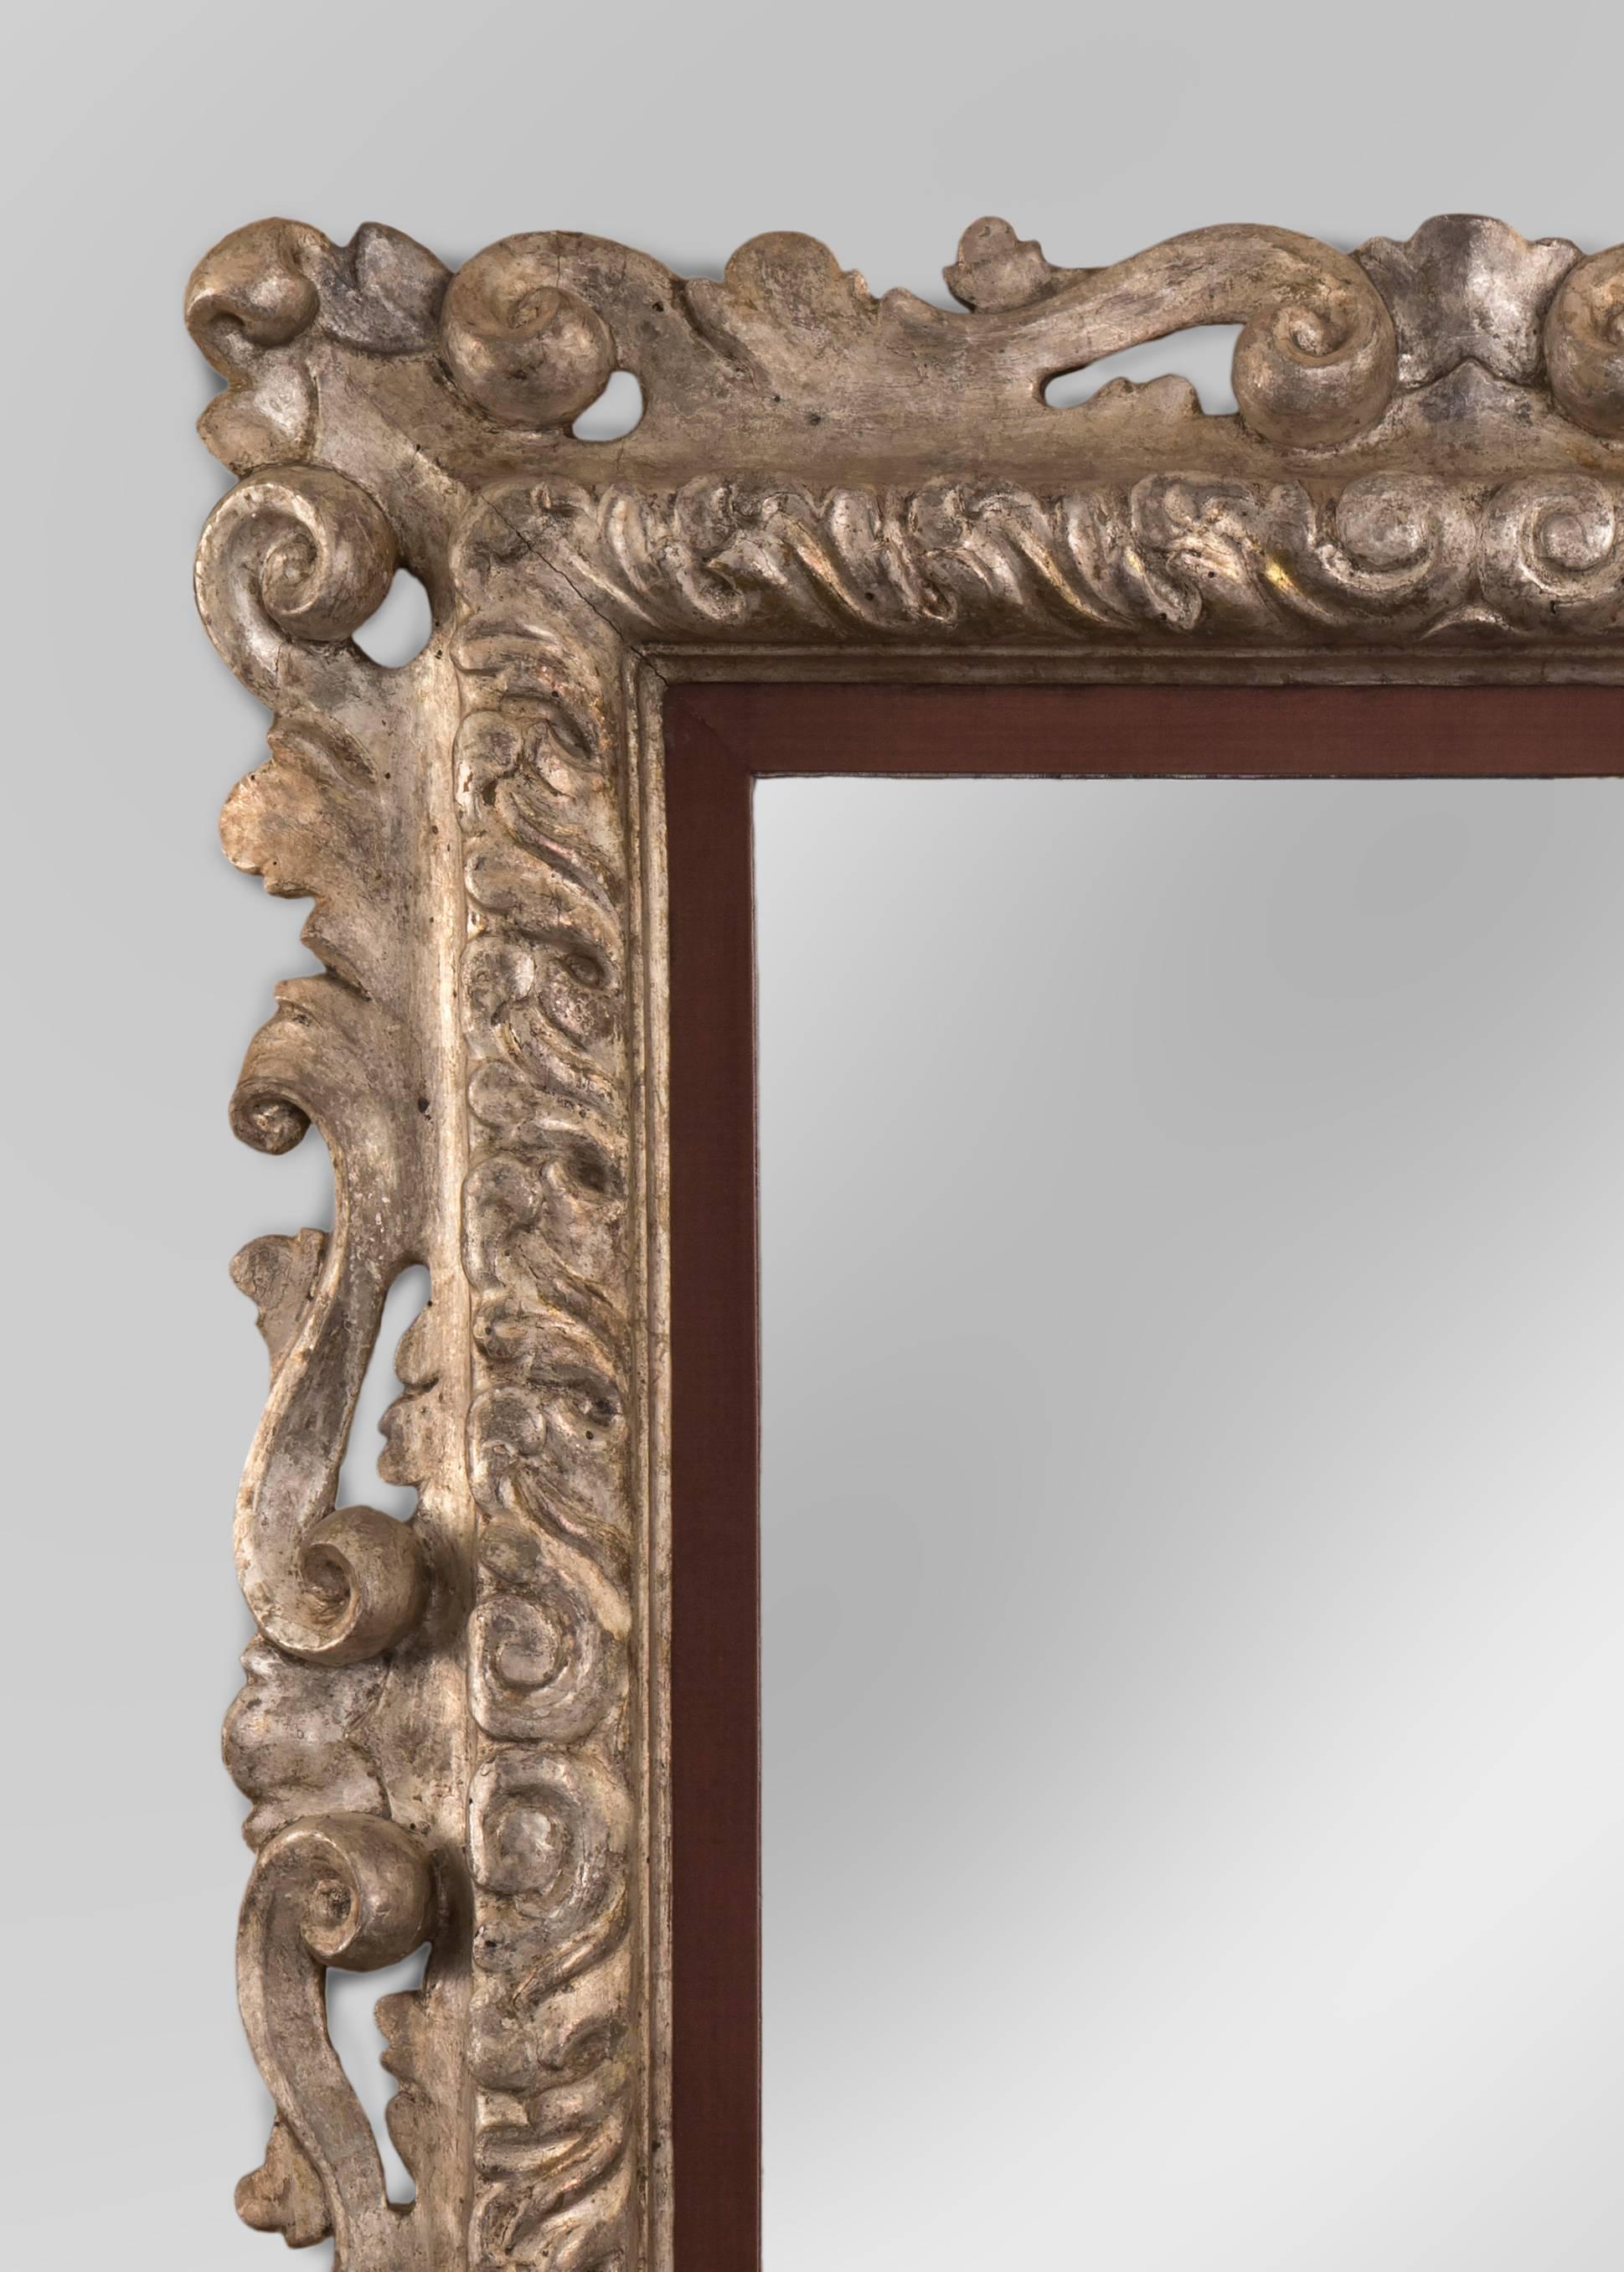 An Italian Baroque silvered mirror
The rectangular mirror plate within pierced foliate and scroll frame.
Possibly Florentine, late 17th century or later.